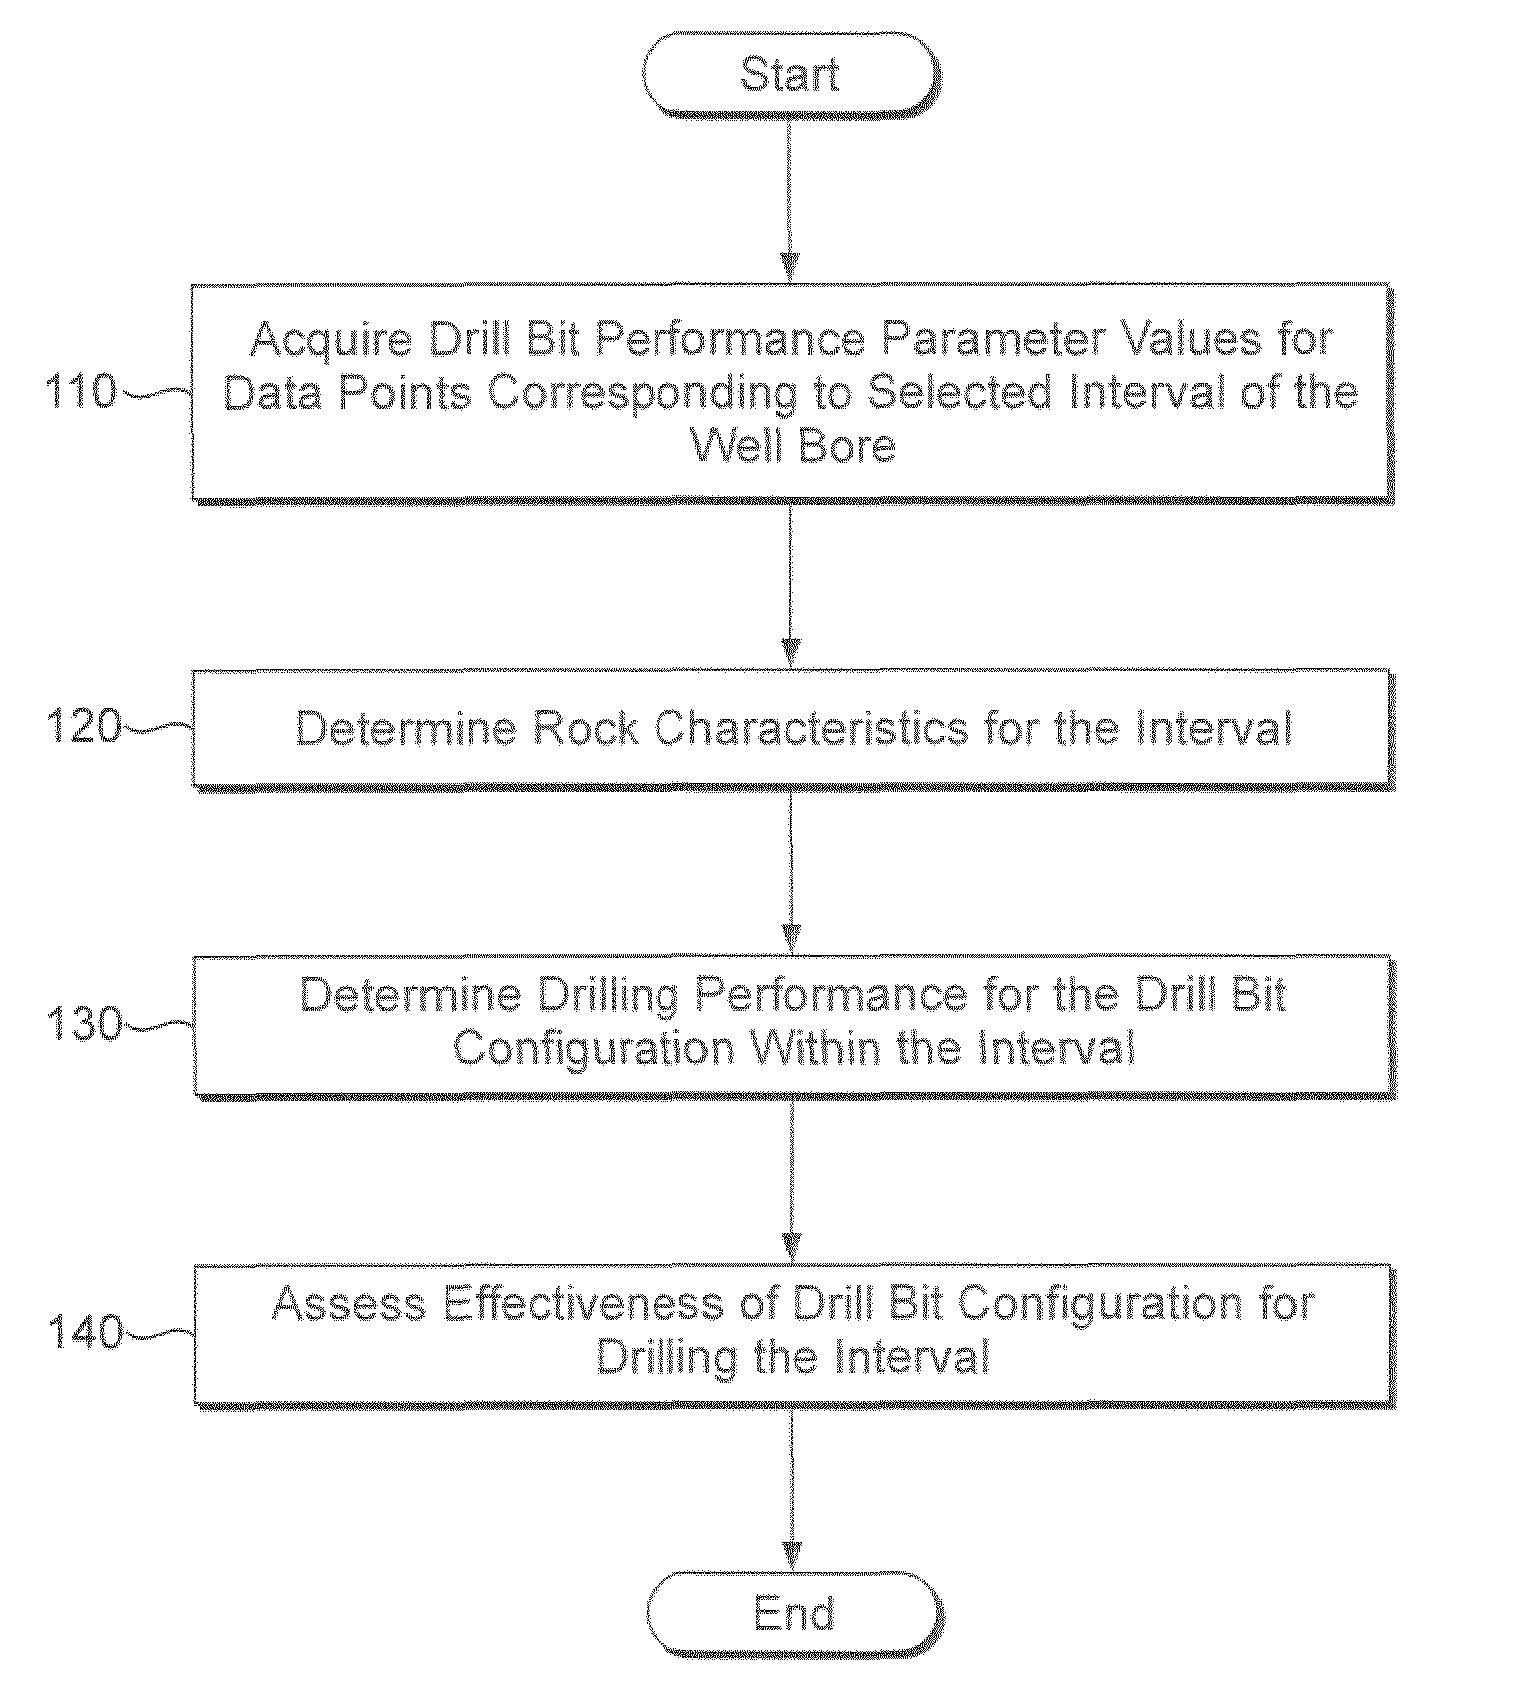 Method for assessing the performance of a drill bit configuration, and for comparing the performance of different drill bit configurations for drilling similar rock formations